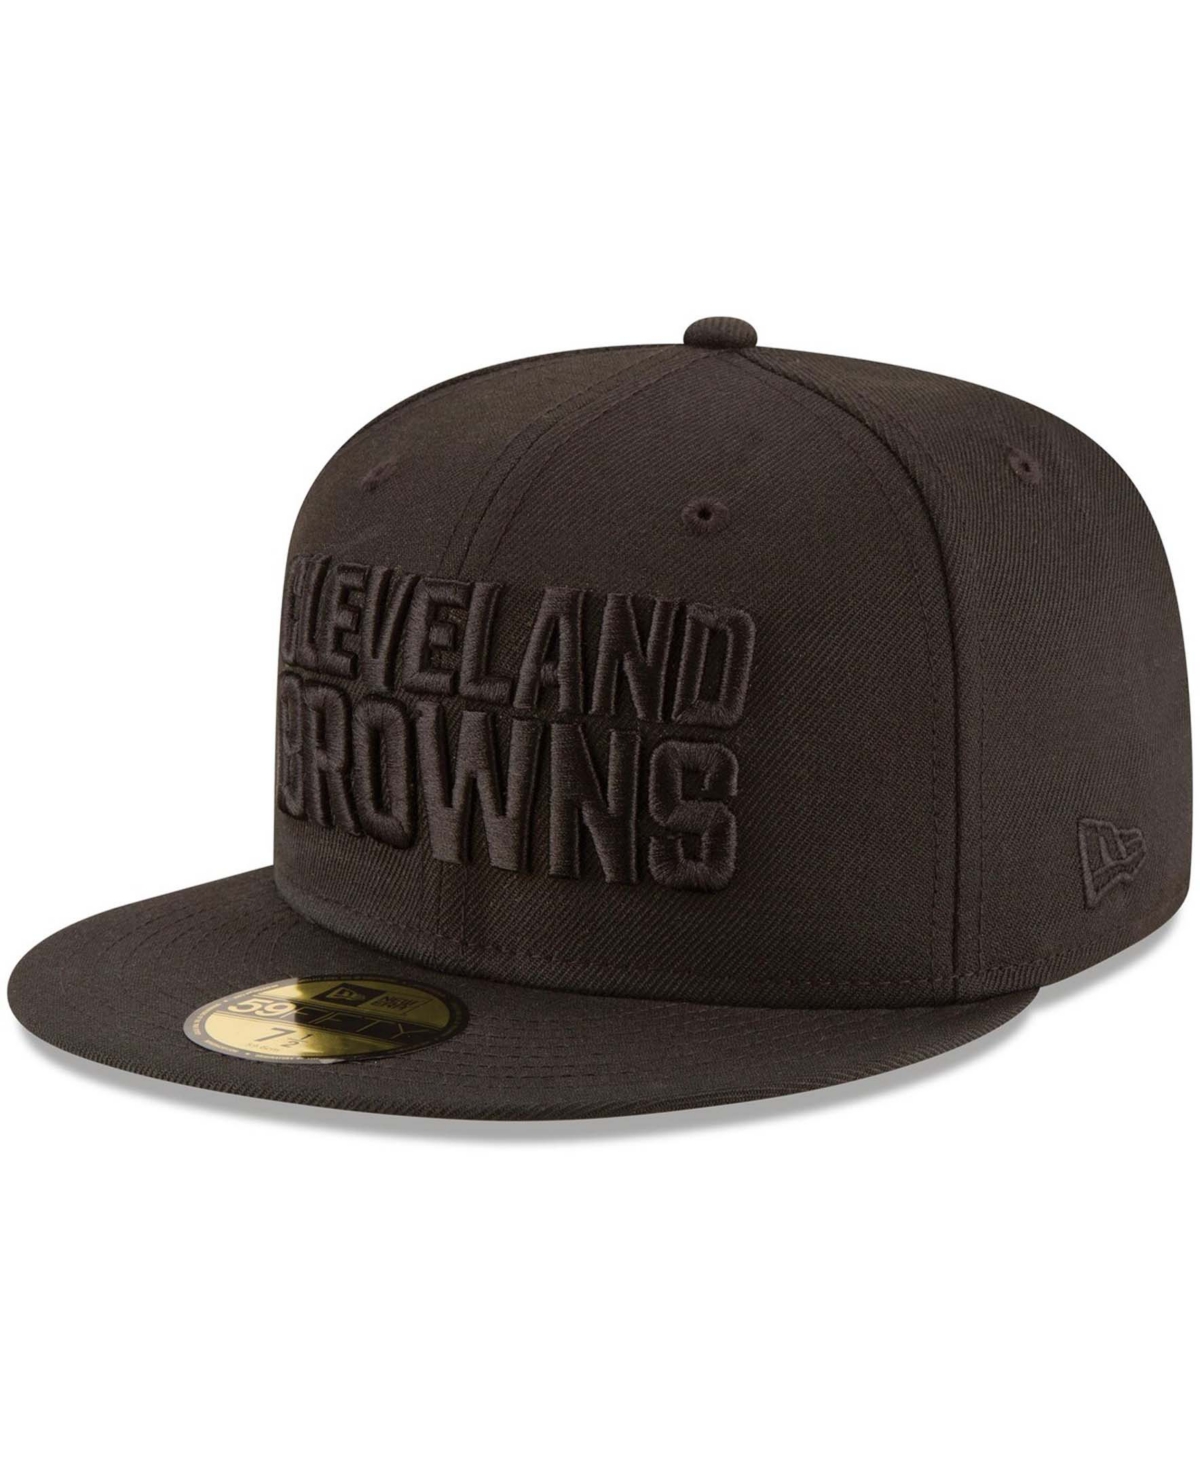 Men's Cleveland Browns Black on Black 59FIFTY Fitted Hat